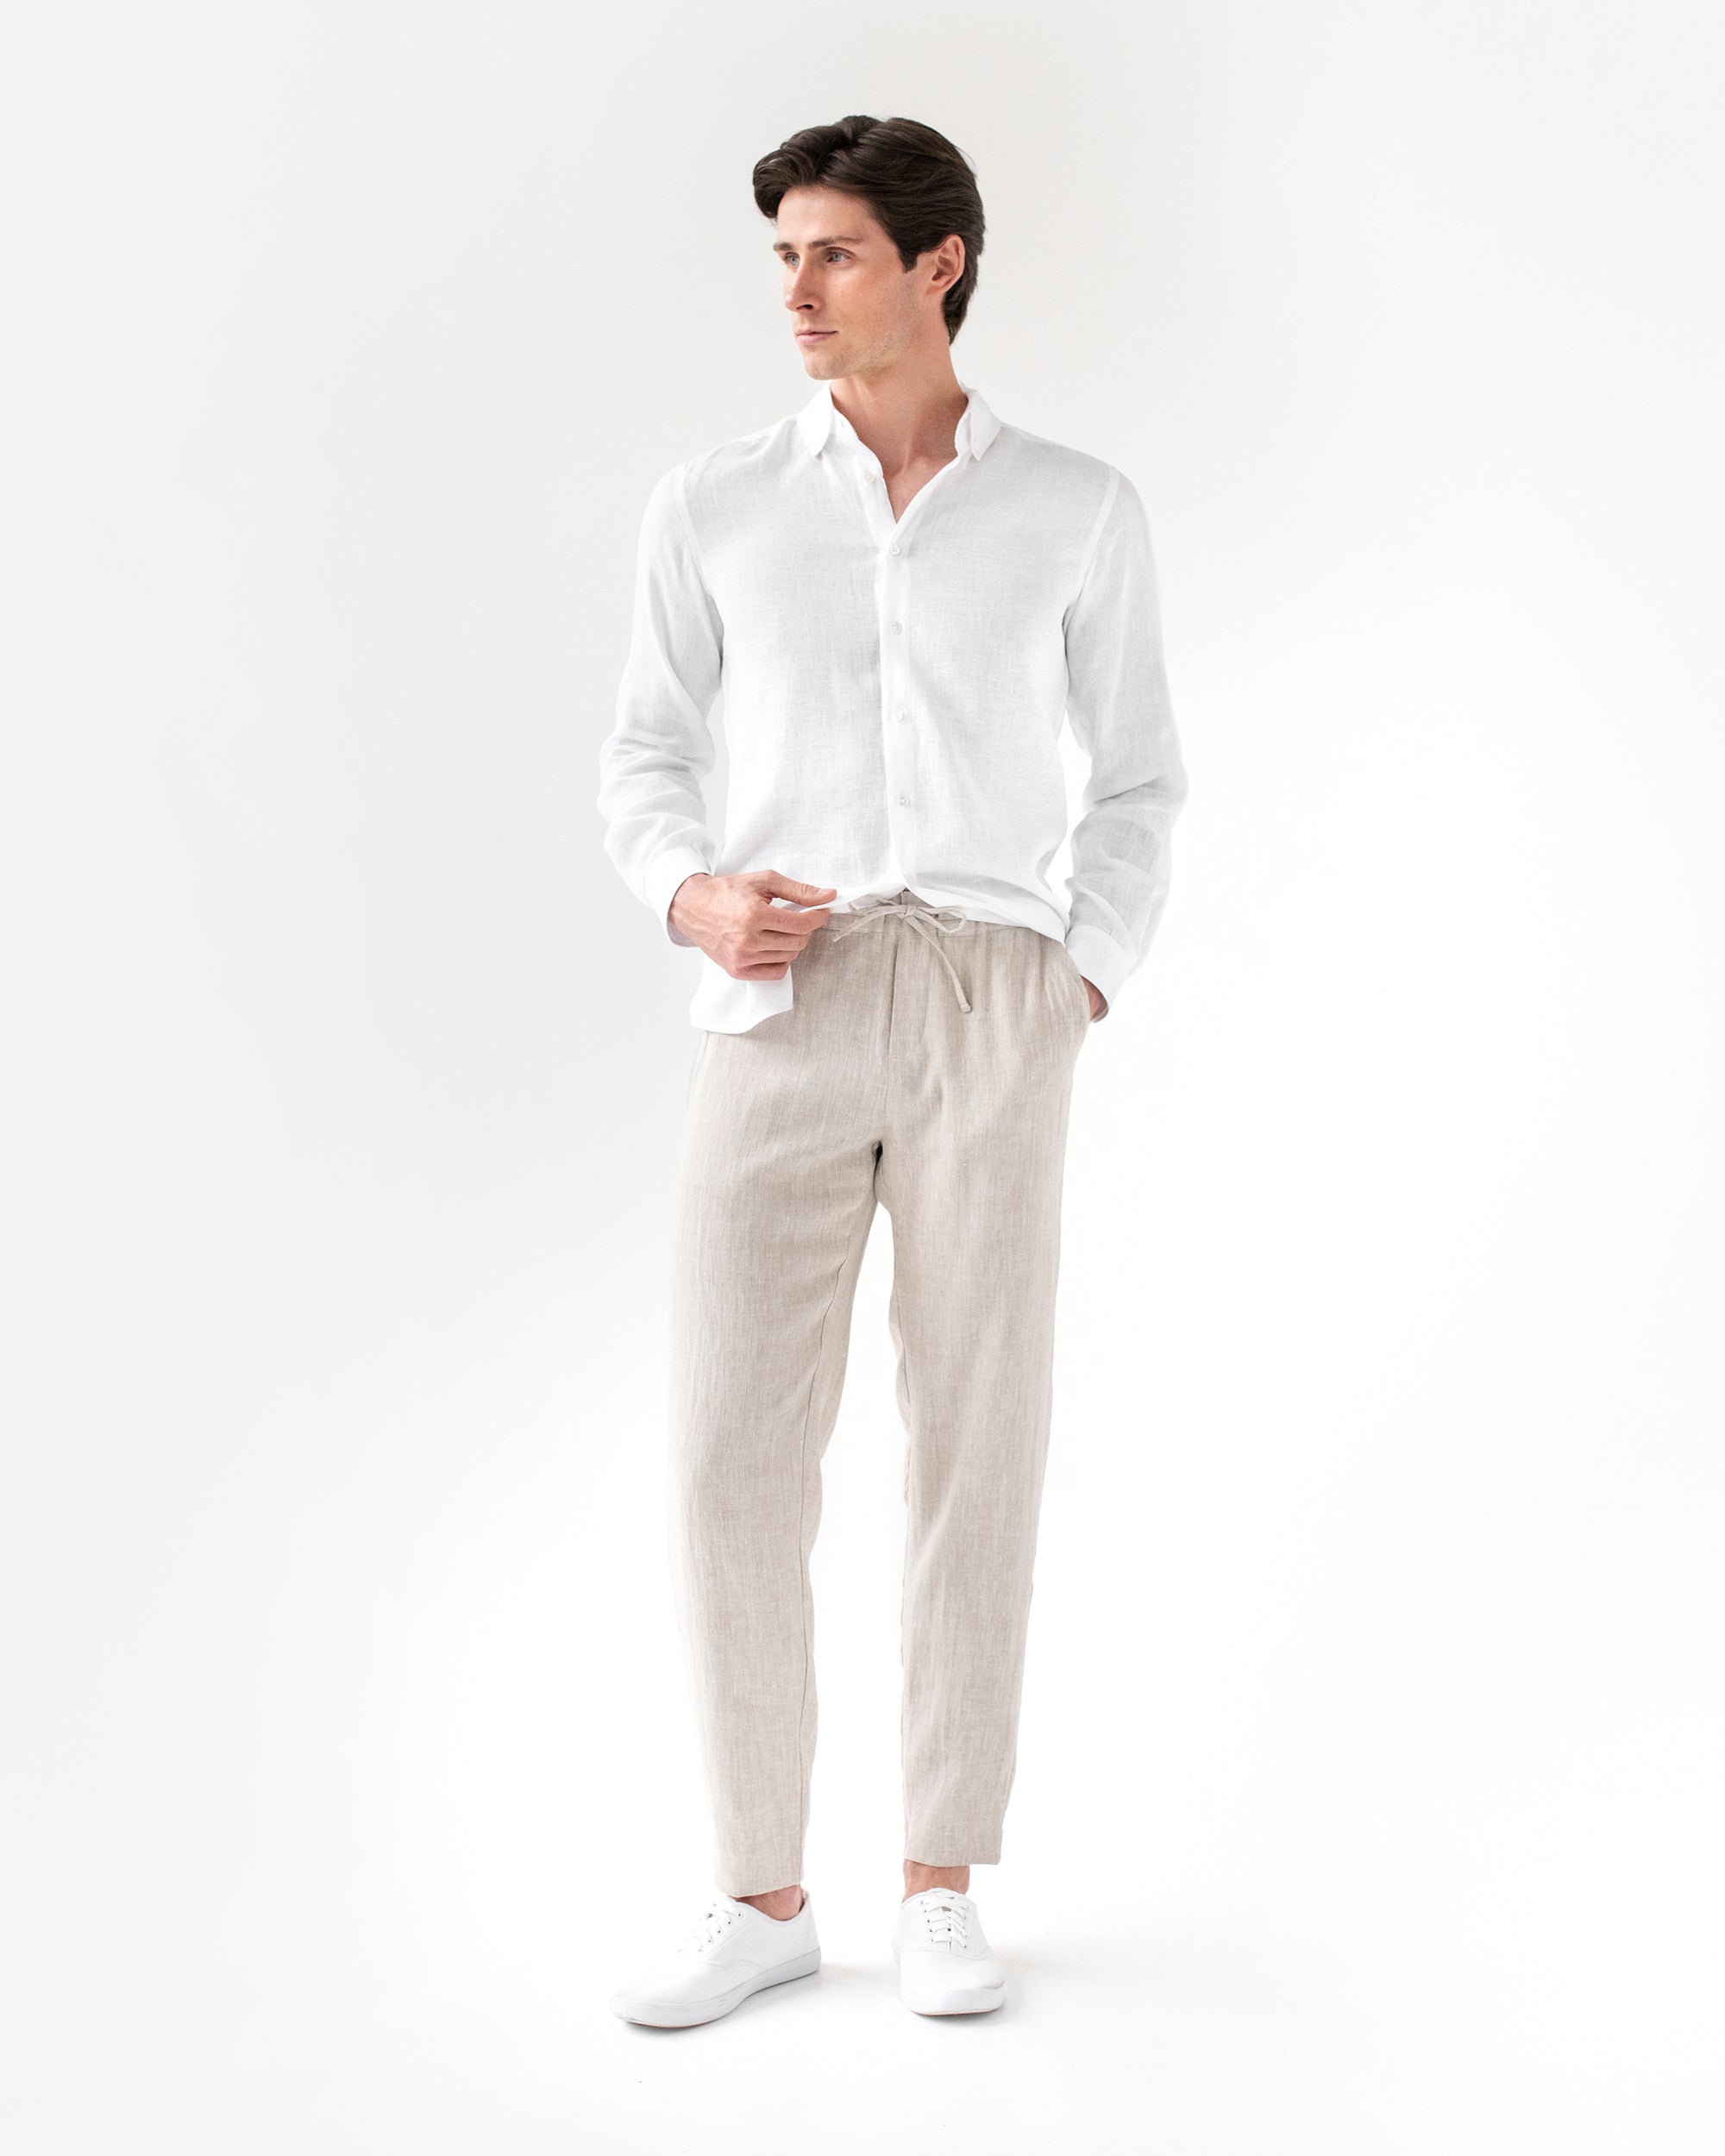 Cy Choi Boundary black linen trousers for men